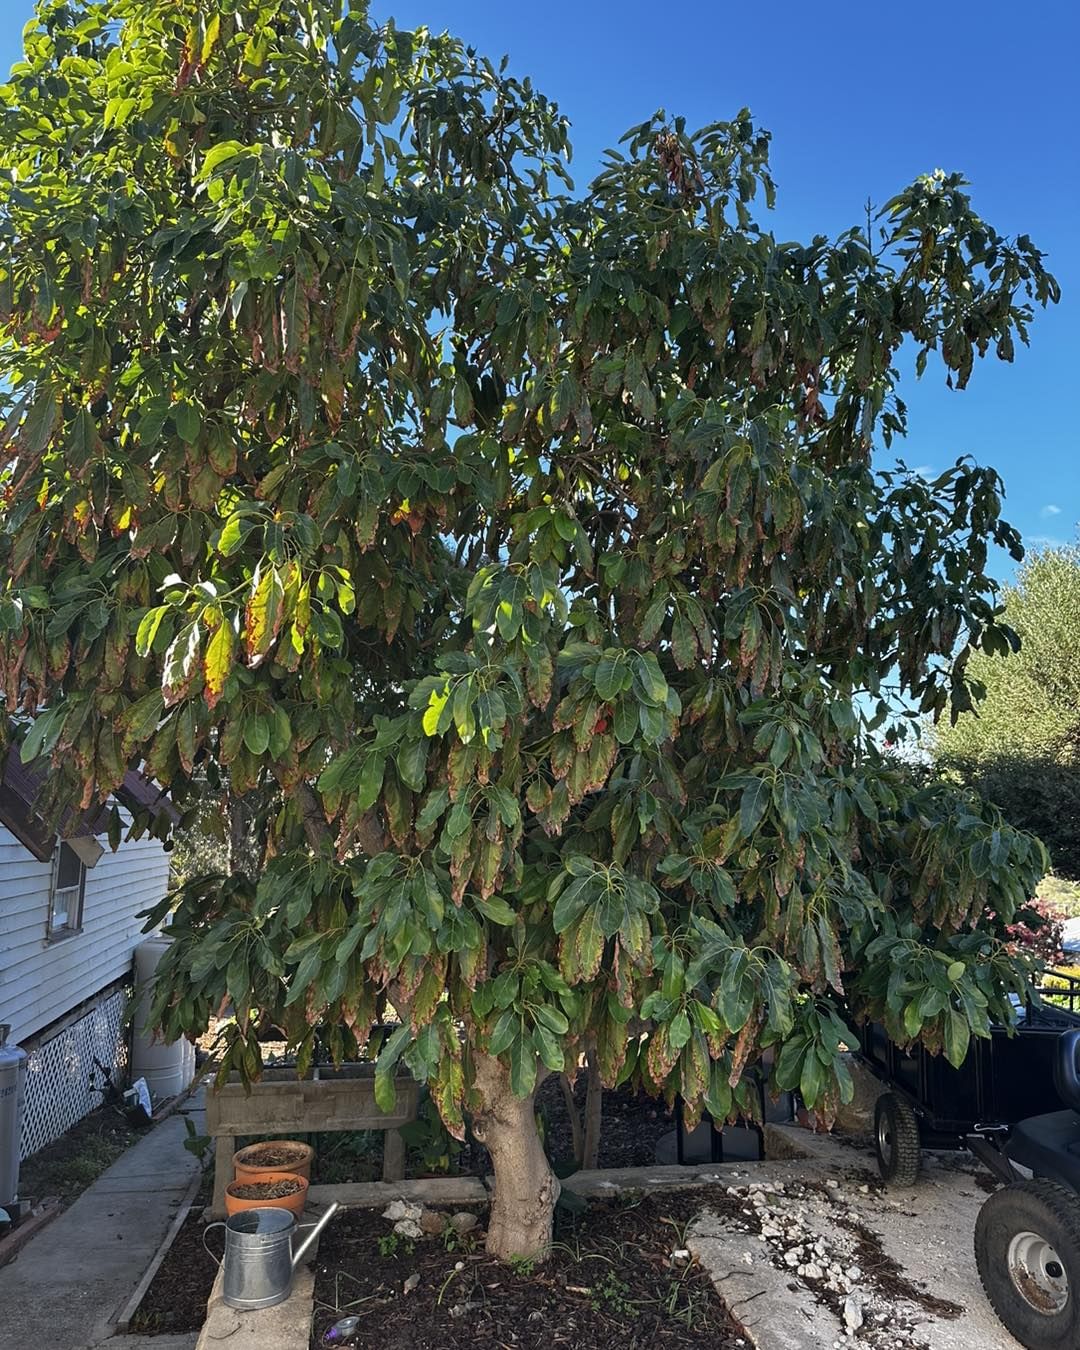 An impressive Persea americana tree, commonly known as an avocado tree, flourishing in a yard with its abundant foliage.